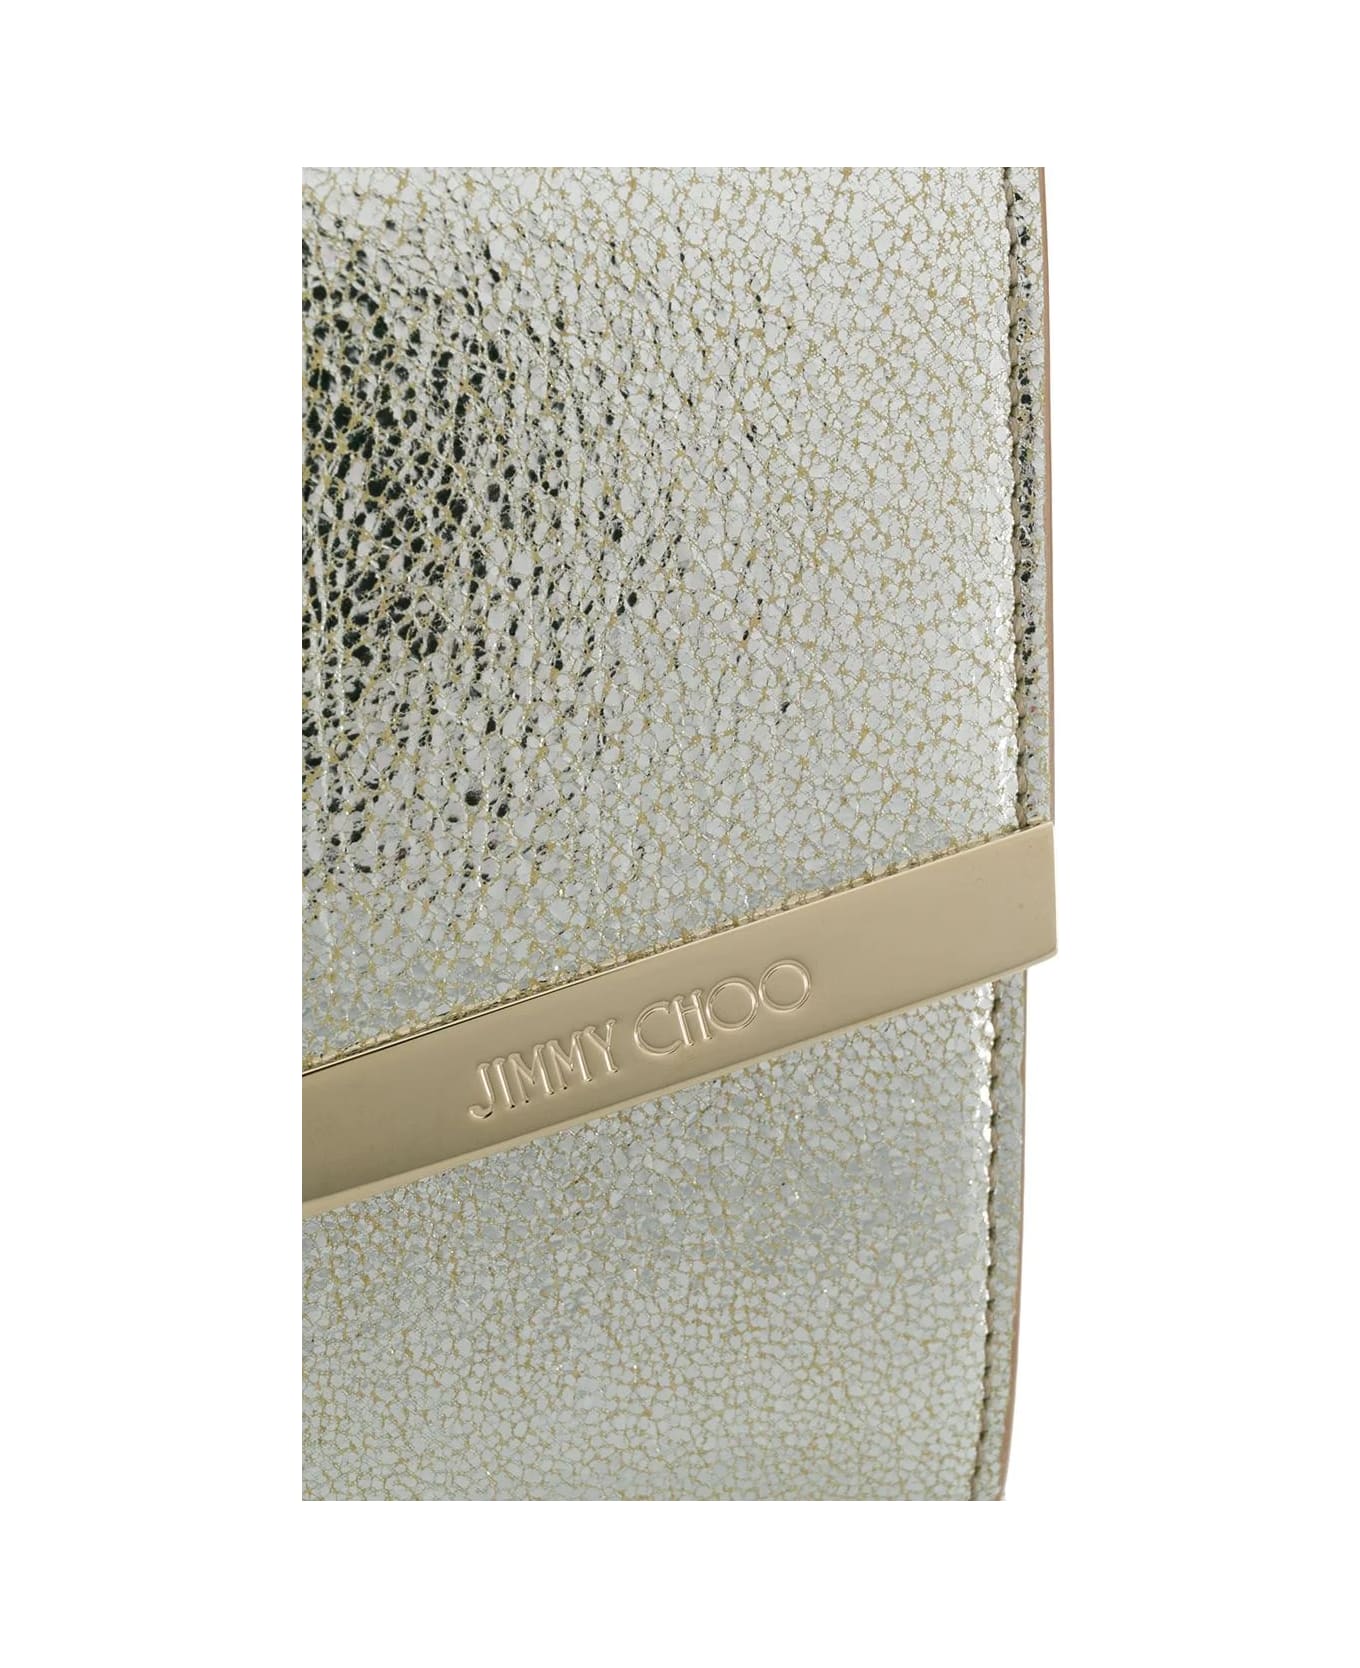 Jimmy Choo Emmie Clutch Bag In Champagne Leather With Glitter - White